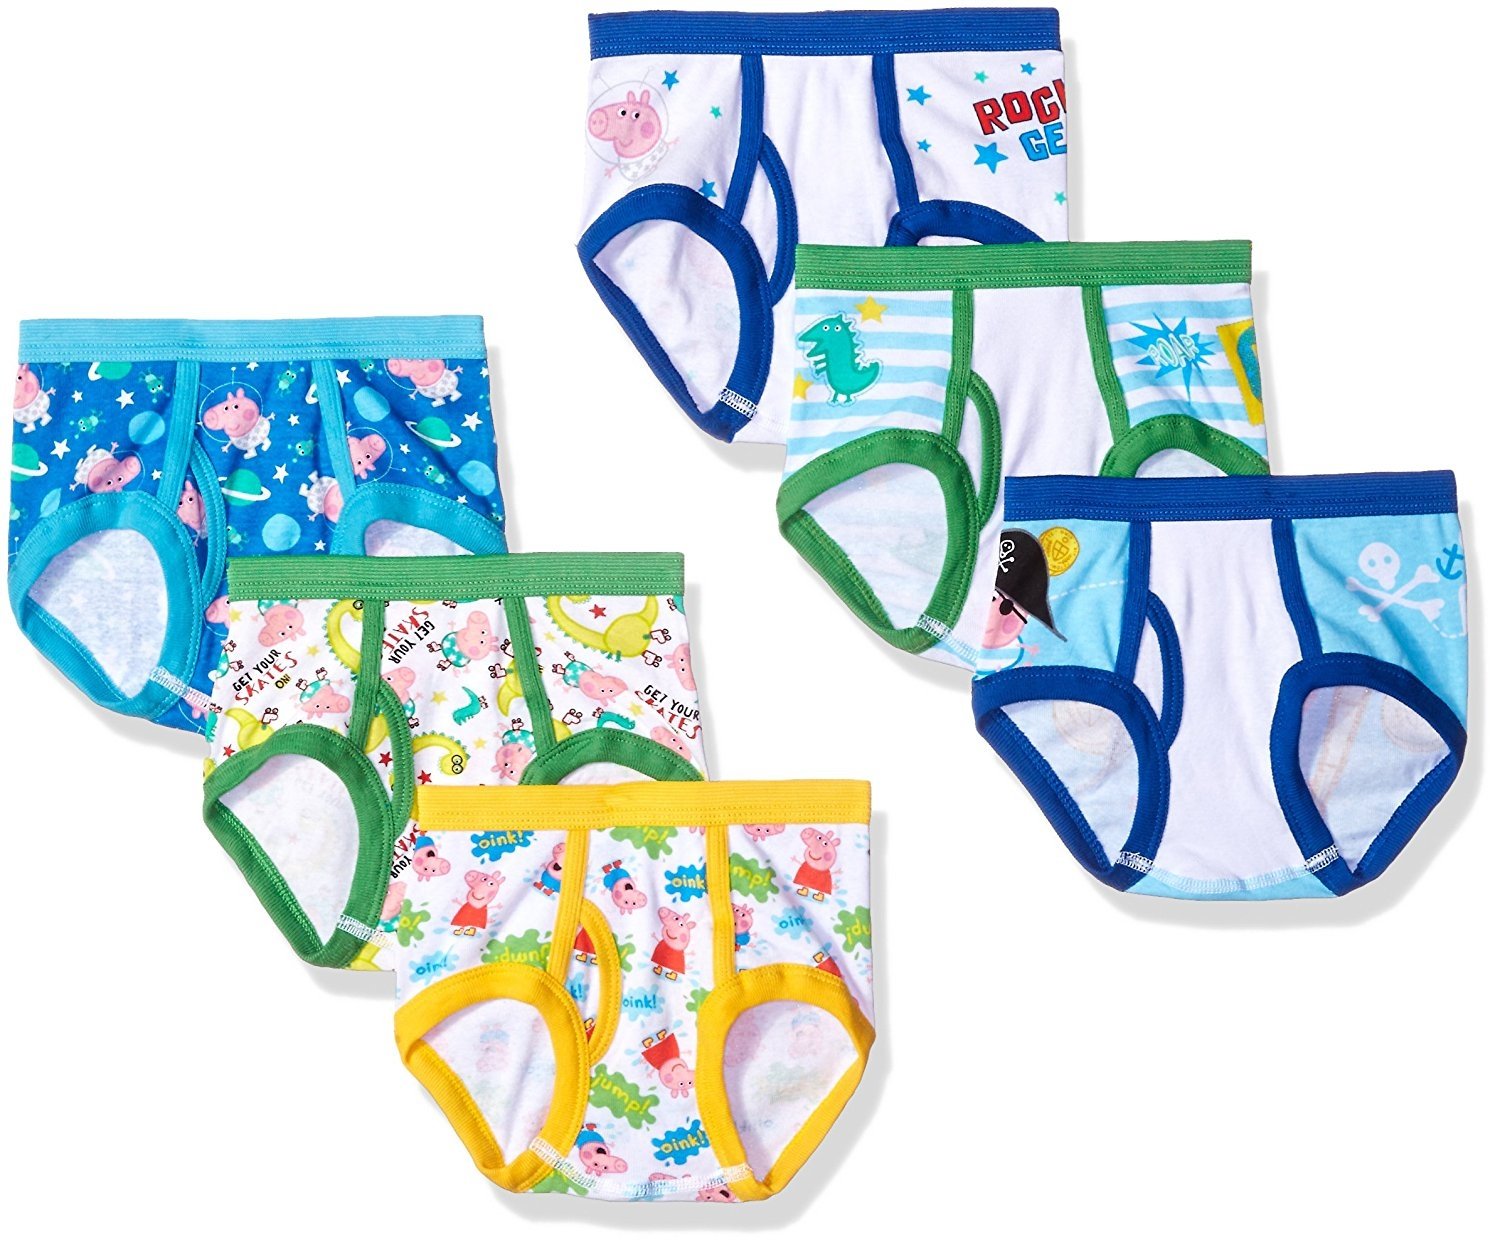 Peppa Pig Boys' Briefs 7-Pack Toddler Underwear Sizes 2T/3T-4T Assorted  Prints